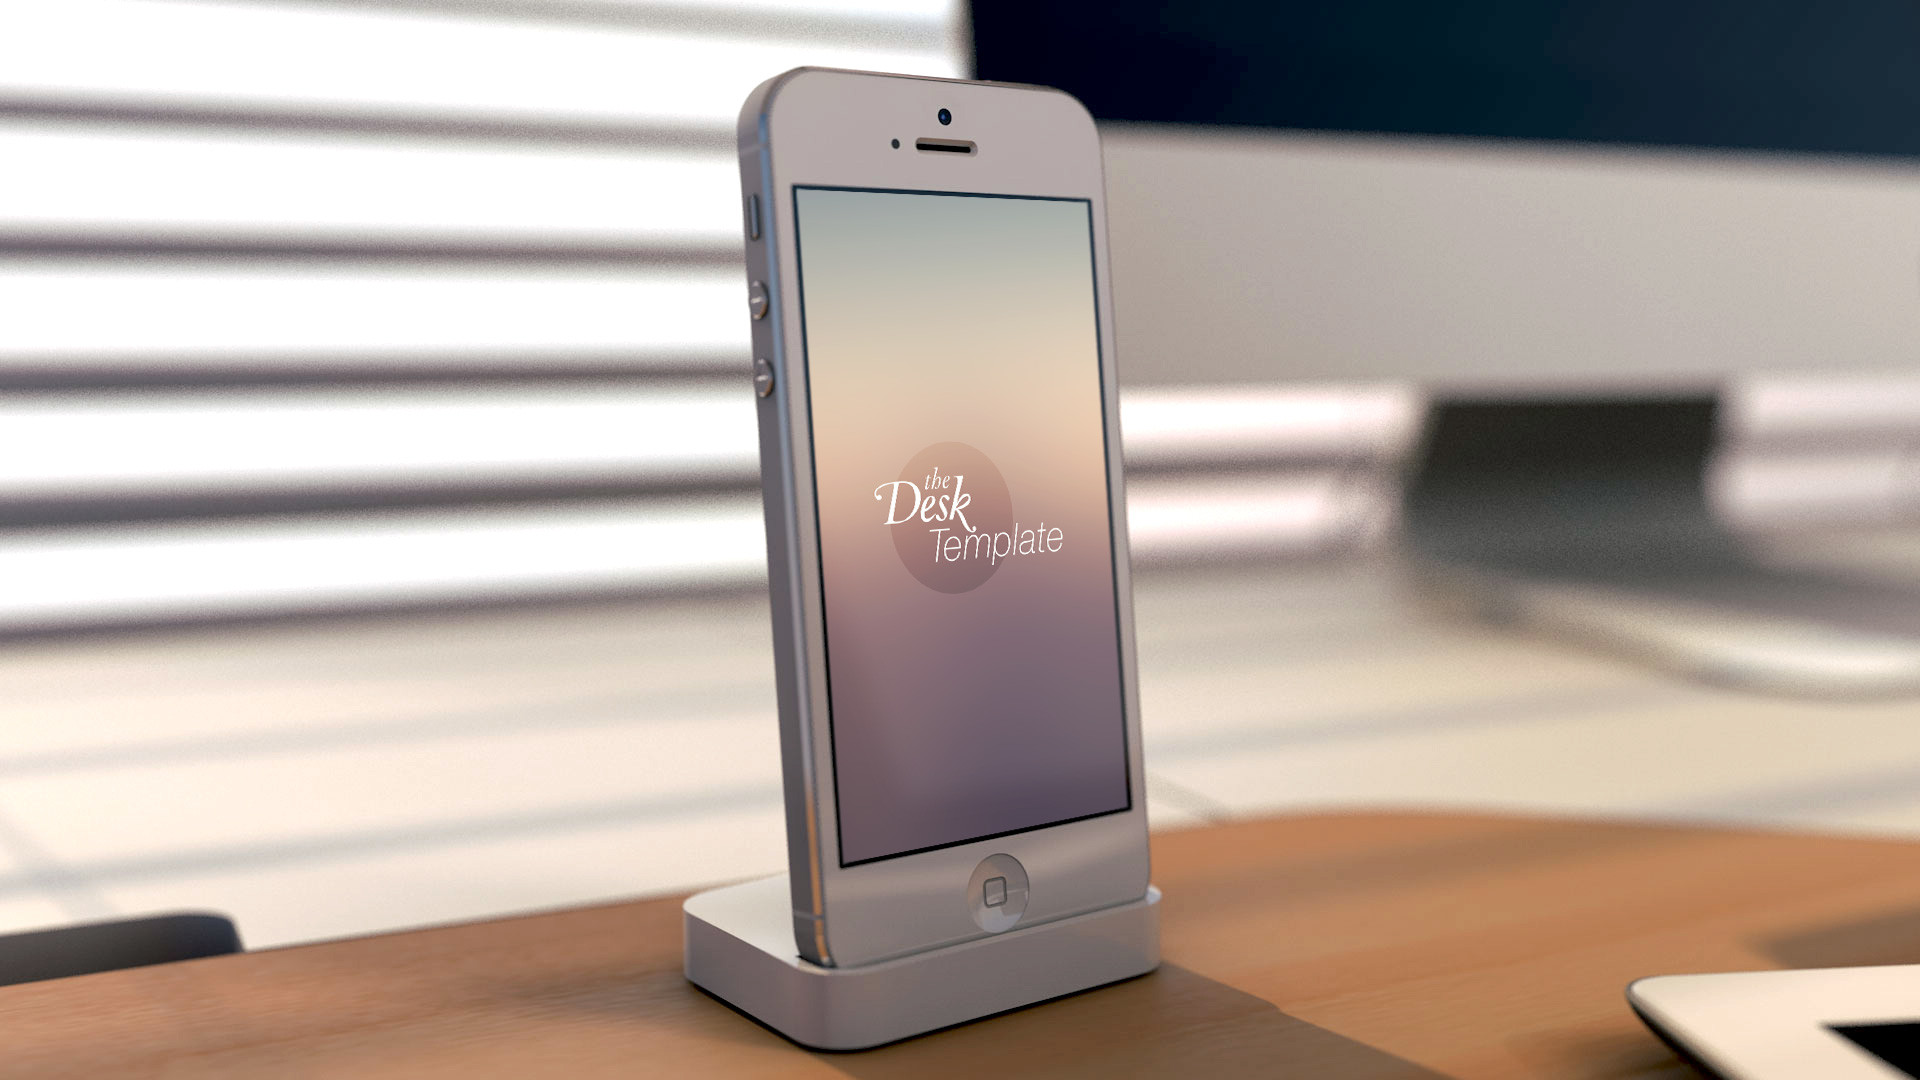 1920x1080 Iphone template